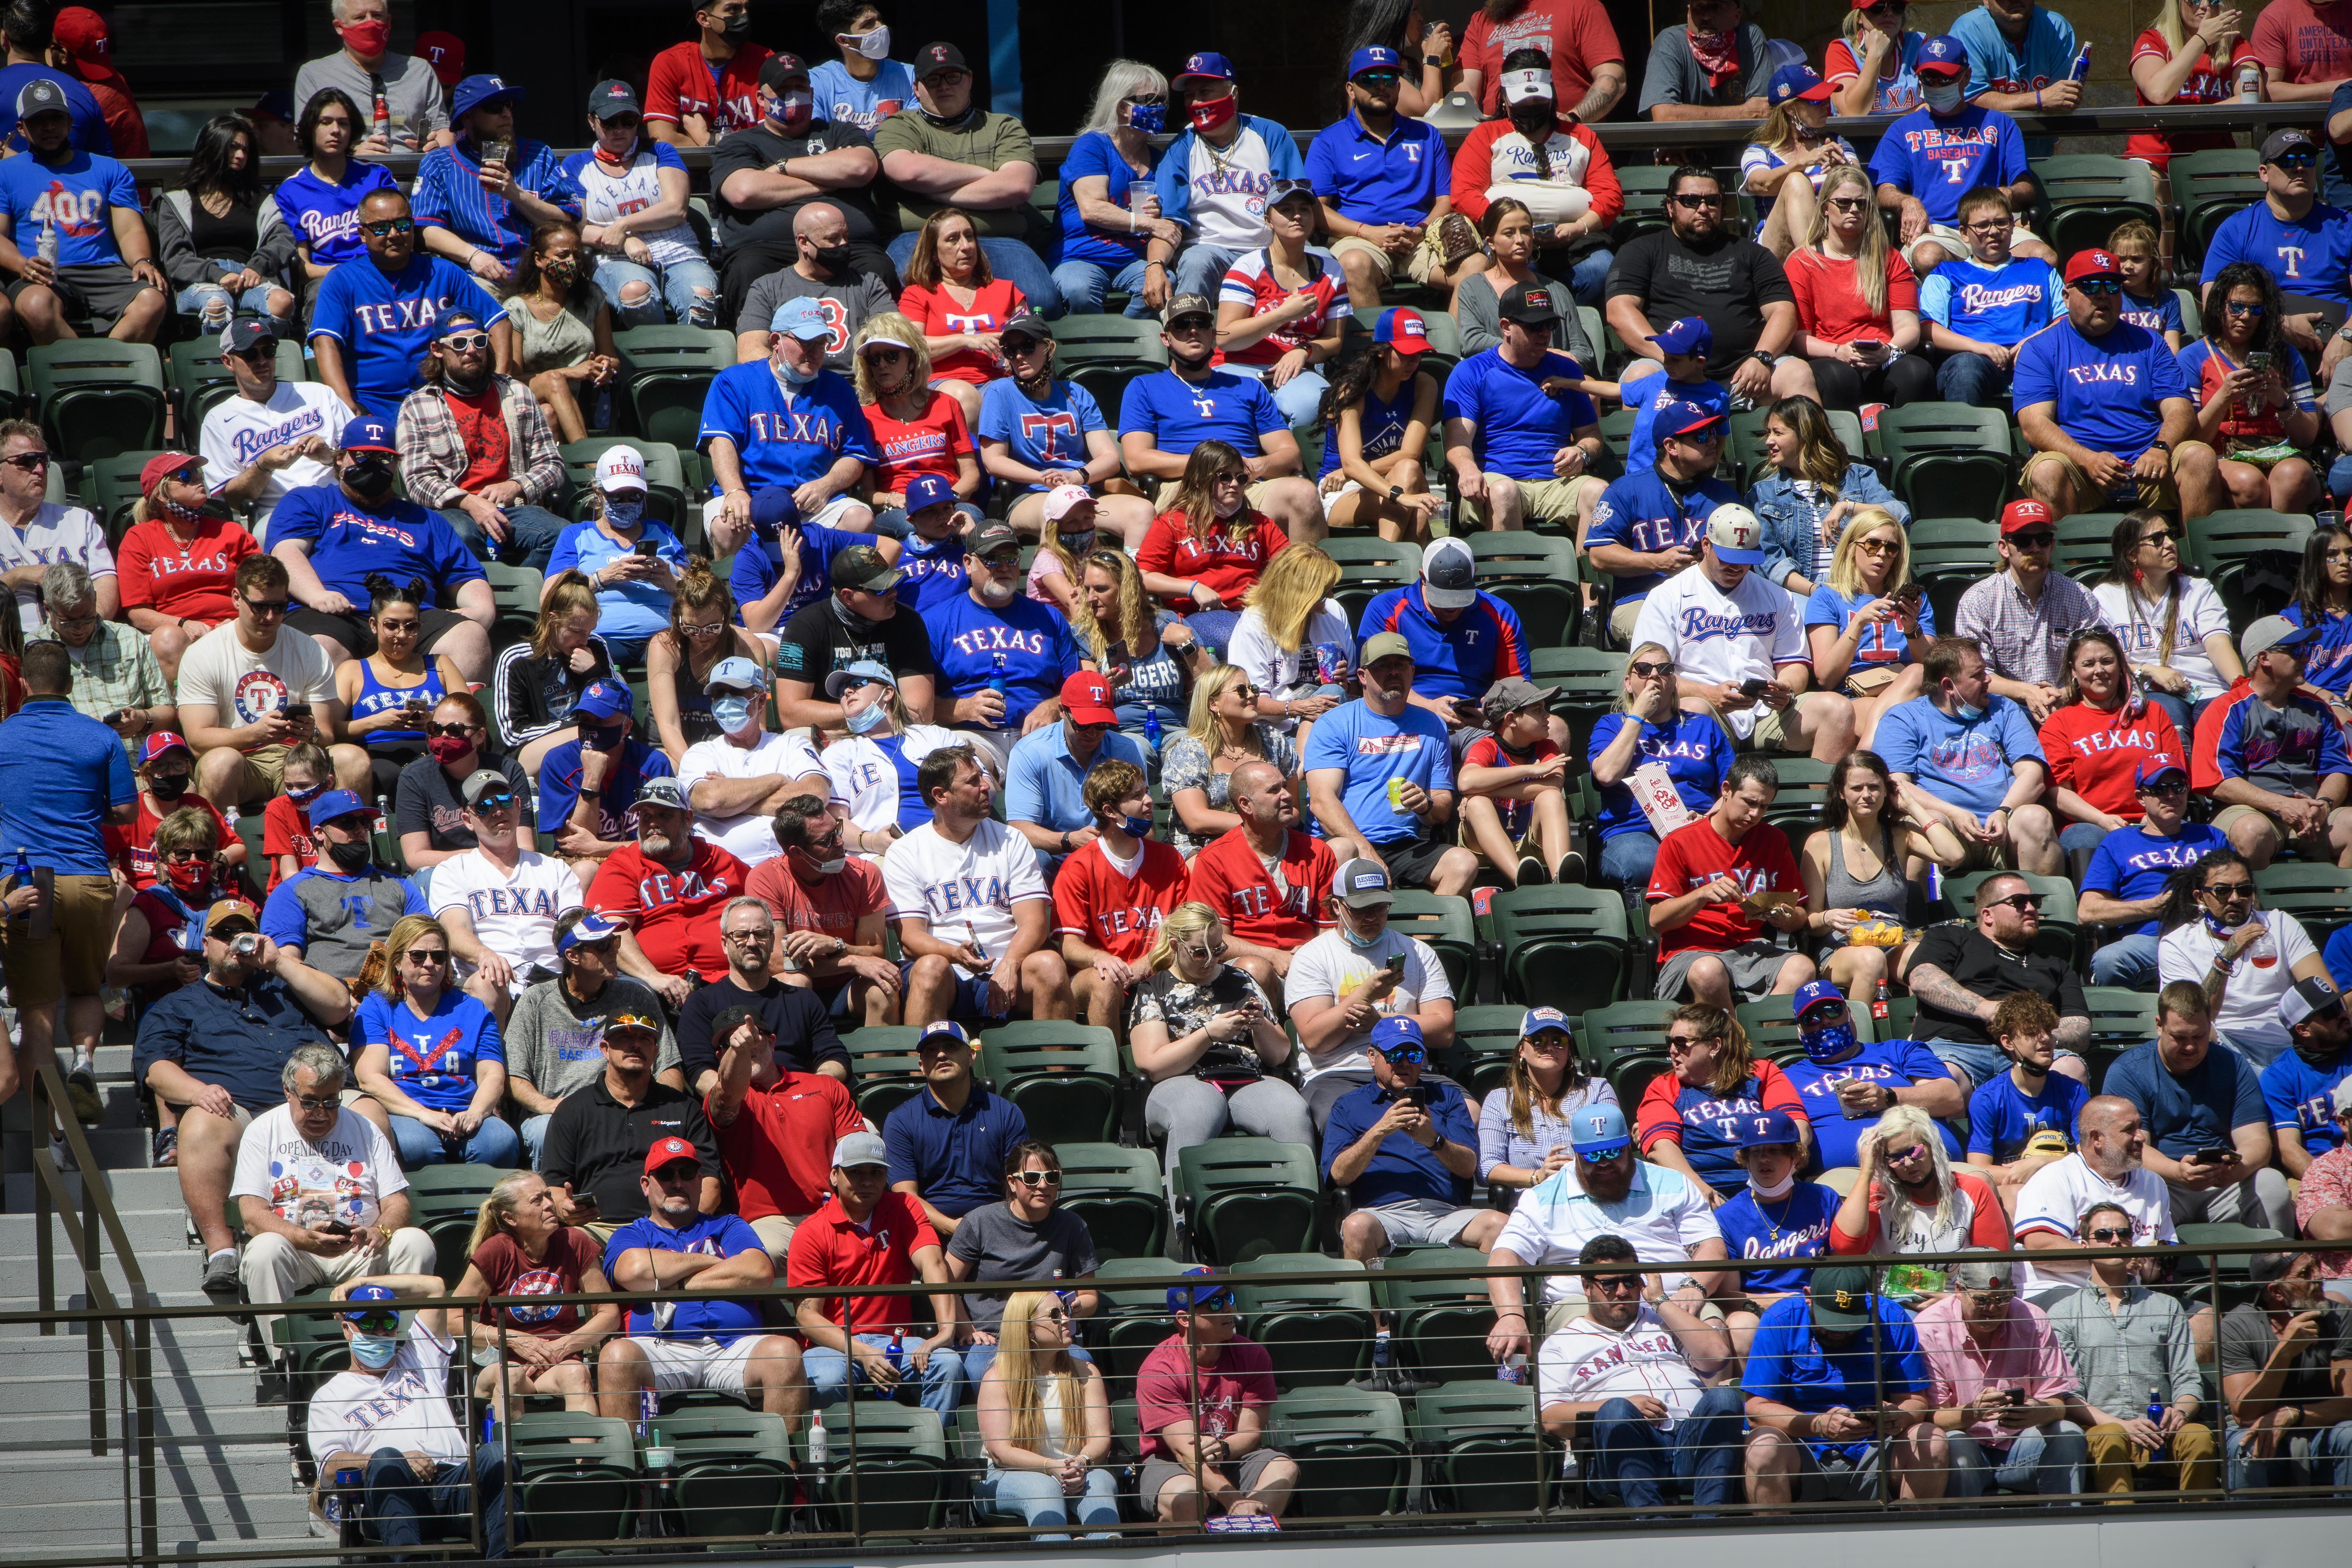 indelukke automatisk Tyranny Baseball-Fans pack stands as Texas Rangers welcome full capacity | Reuters